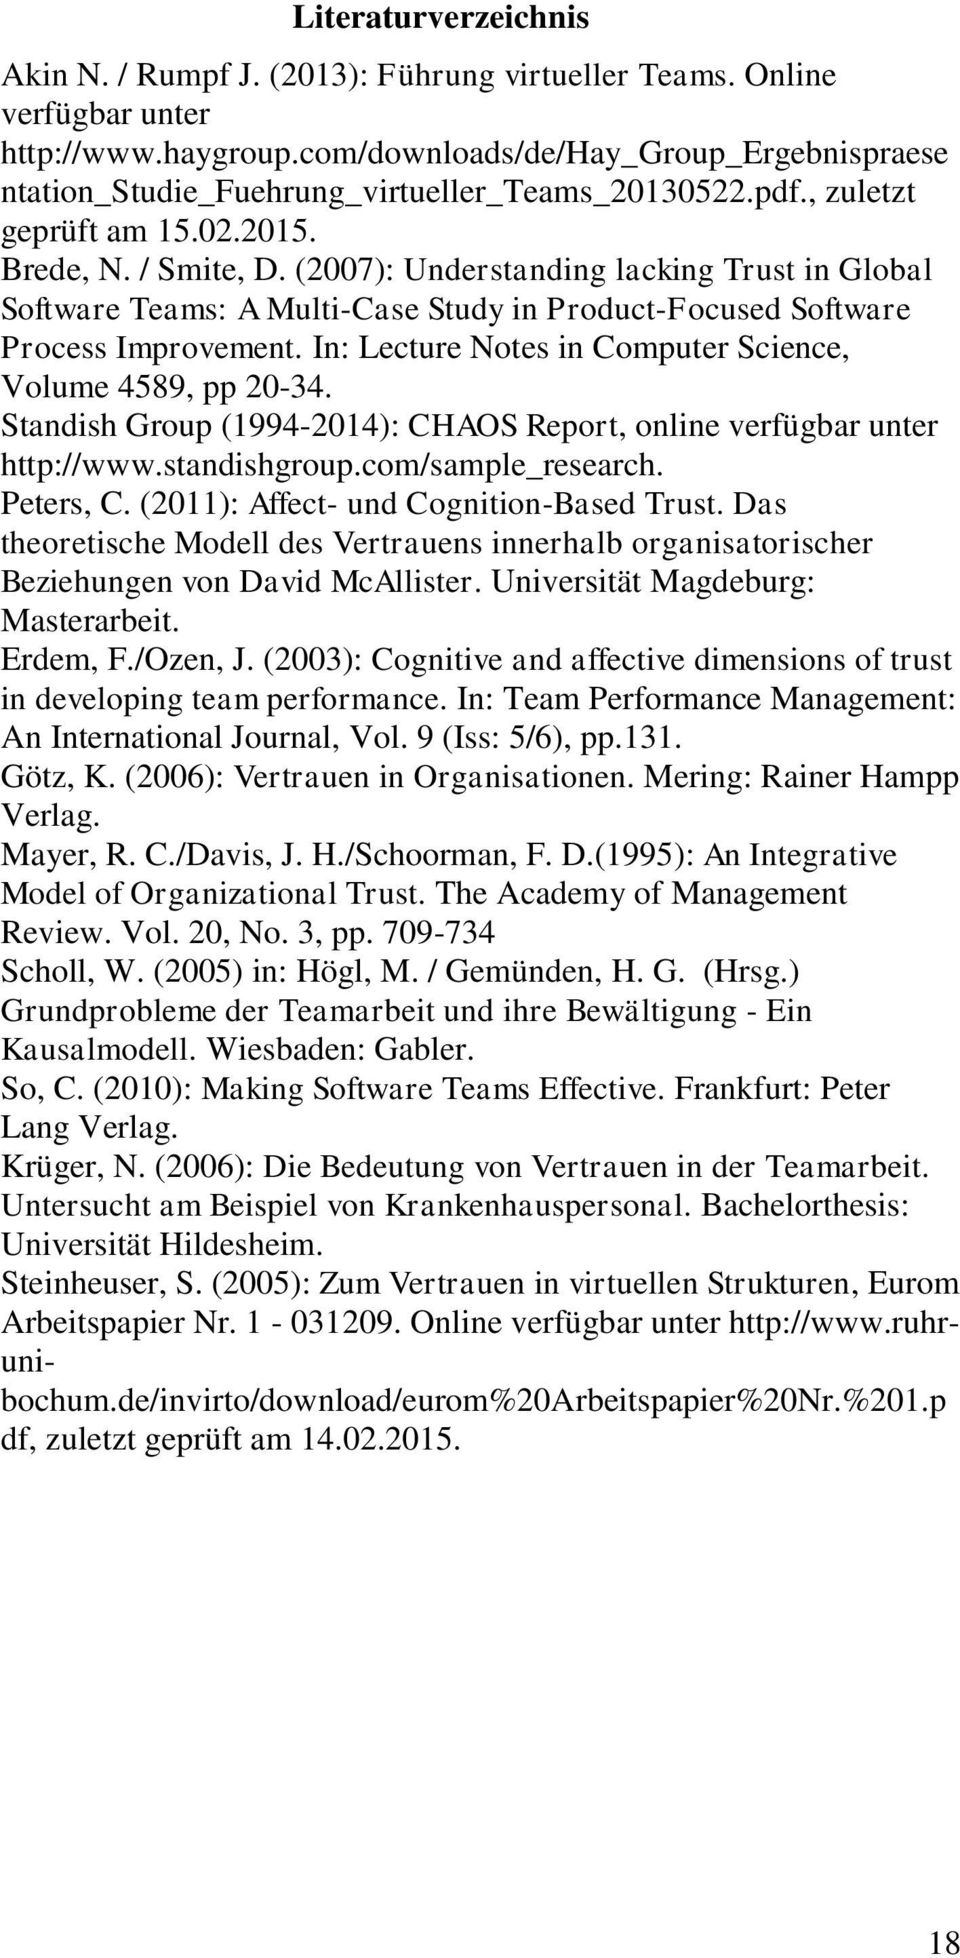 (2007): Understanding lacking Trust in Global Software Teams: A Multi-Case Study in Product-Focused Software Process Improvement. In: Lecture Notes in Computer Science, Volume 4589, pp 20-34.